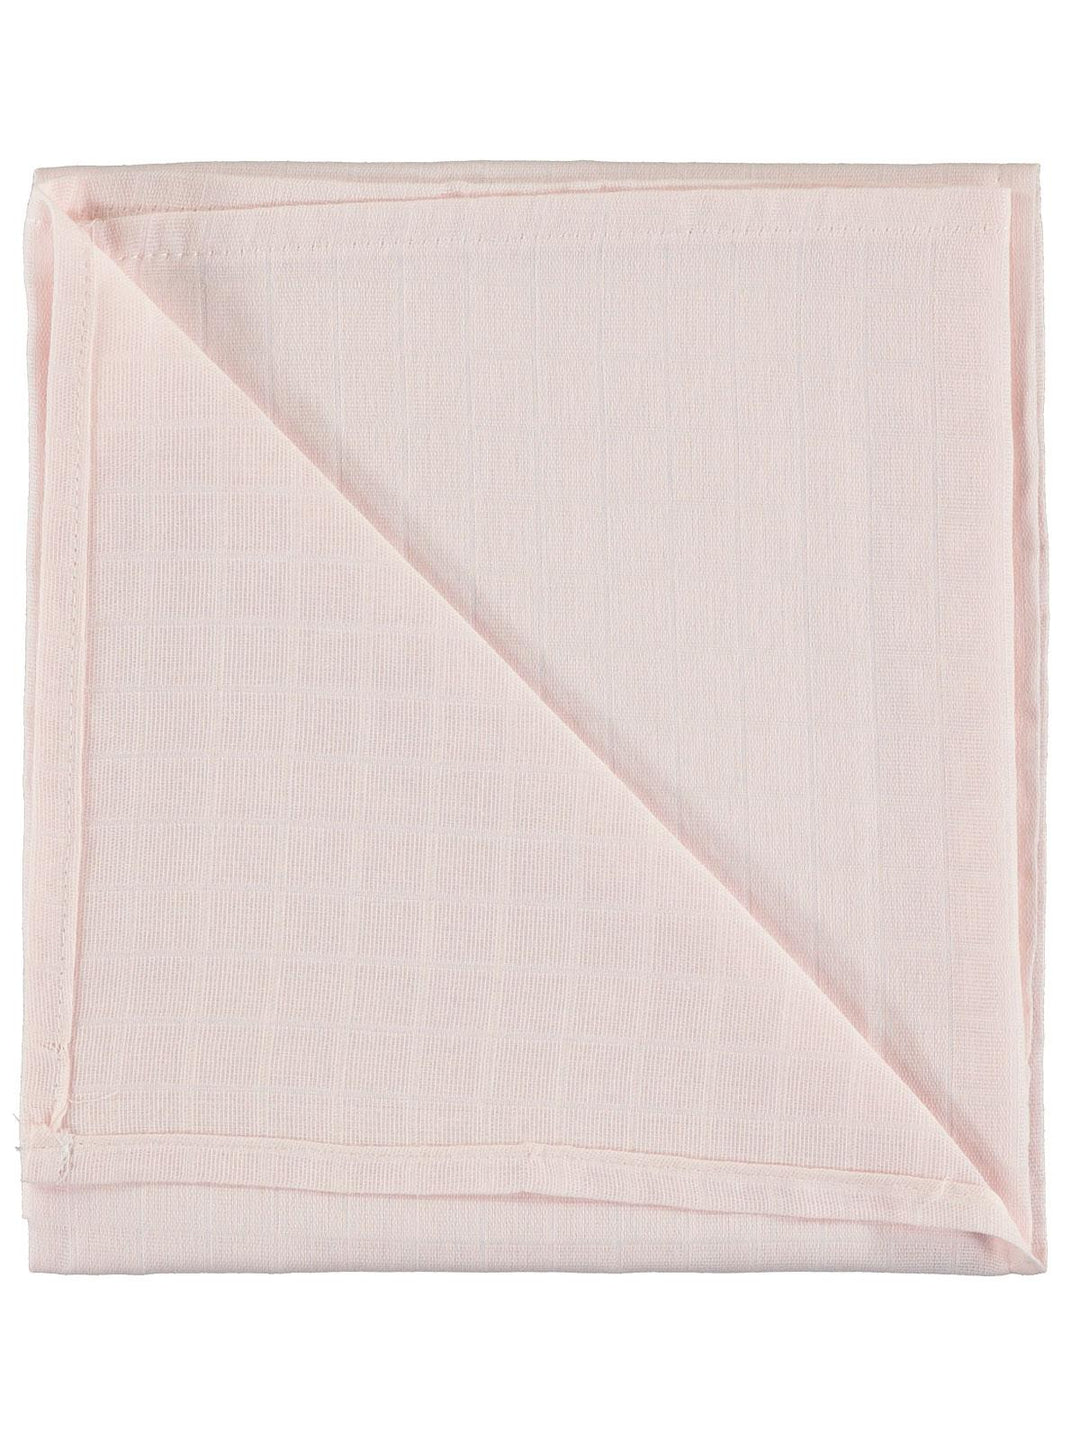 Civil Baby Cotton Wrapping Sheet #5593 (S-22)